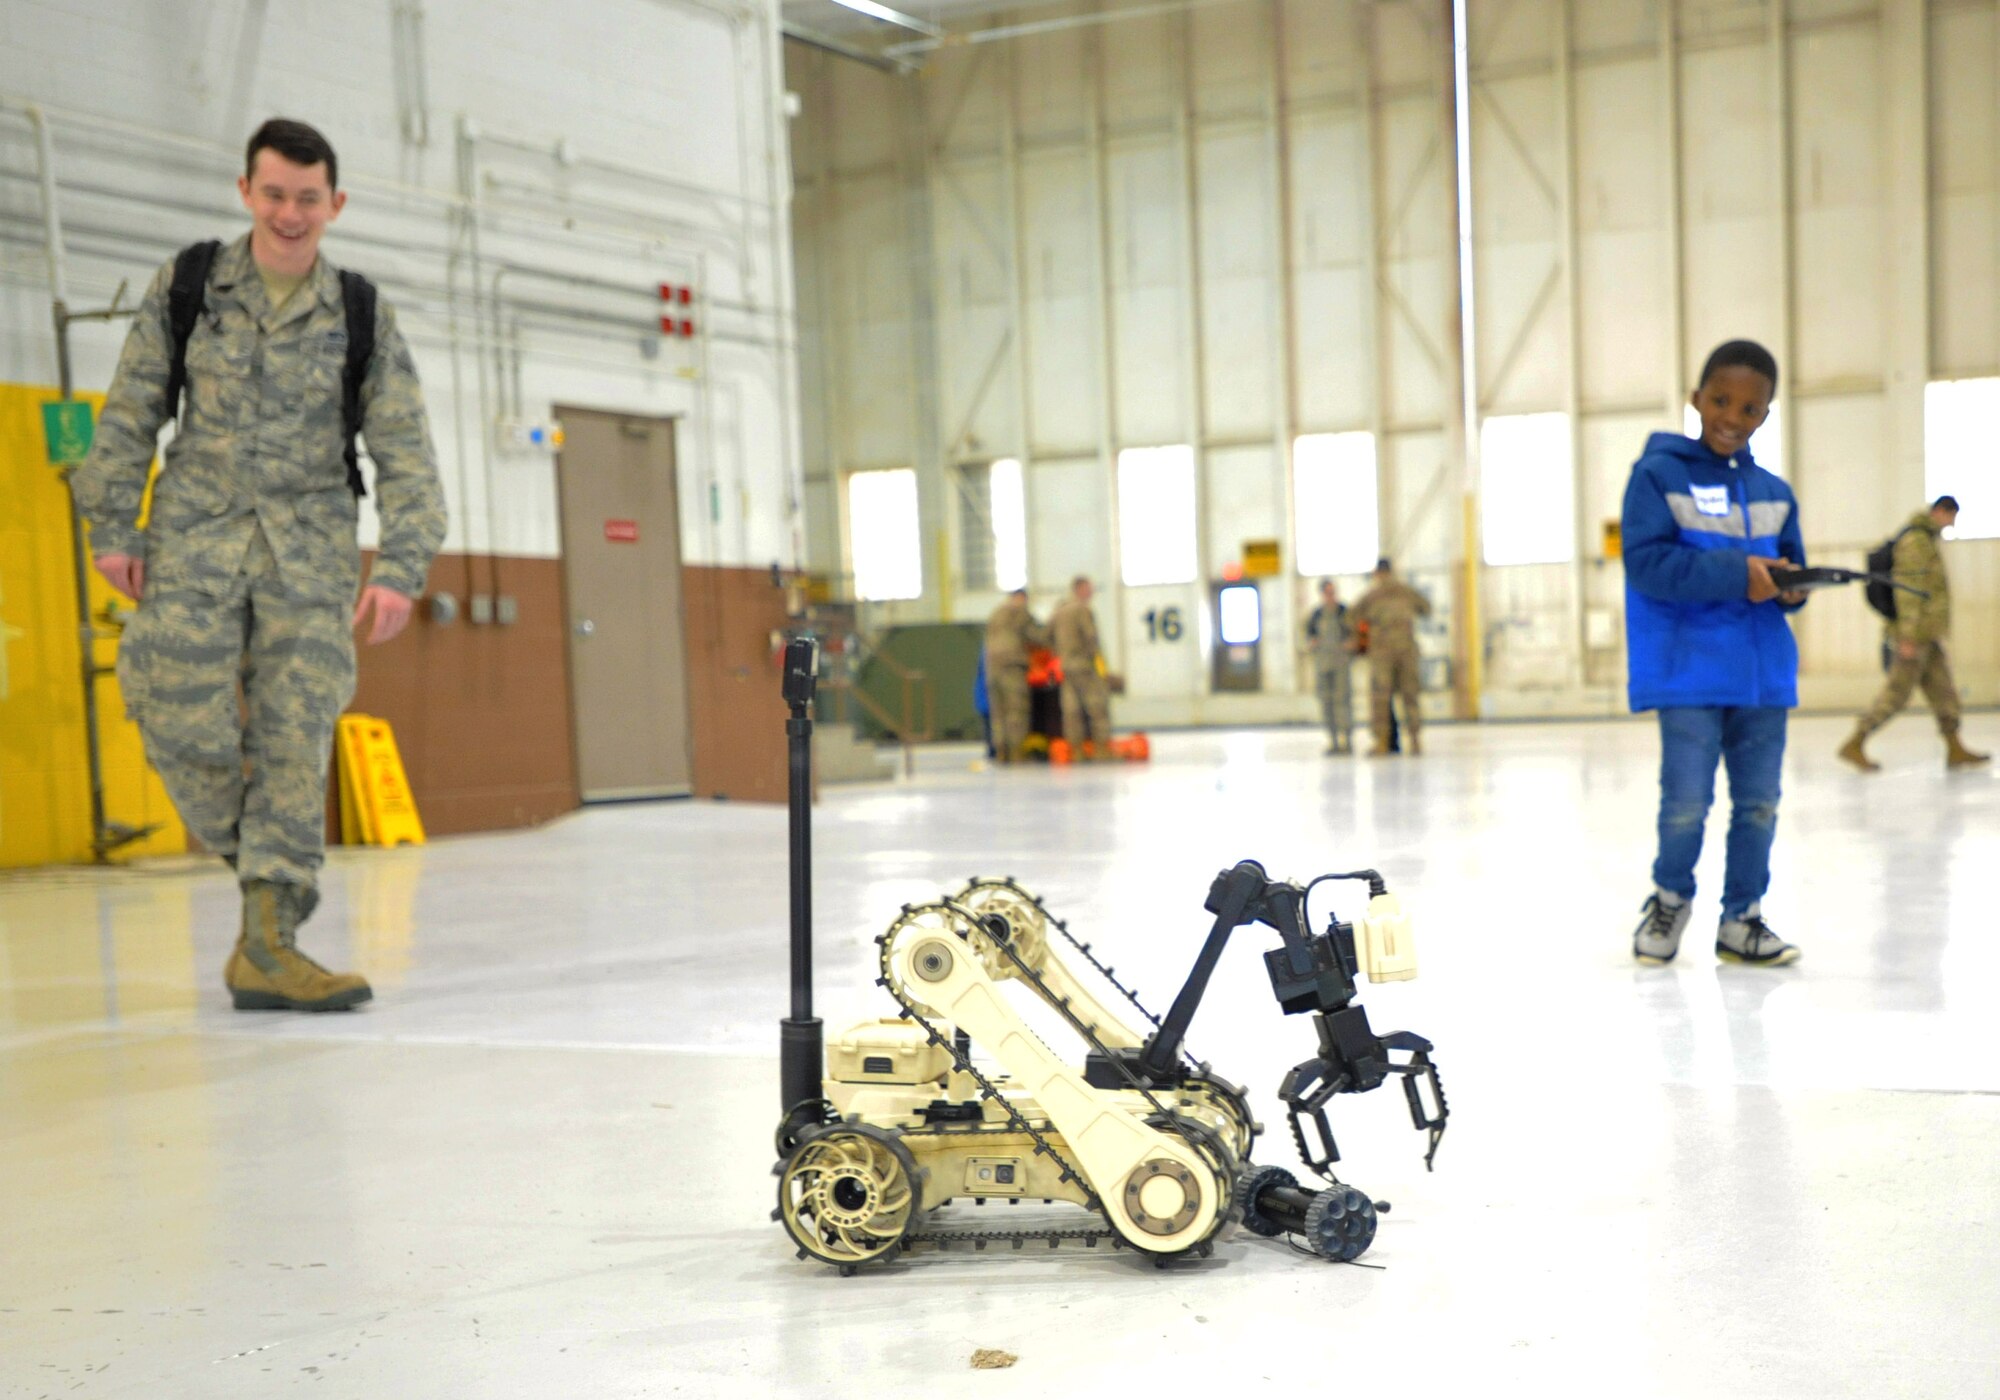 A child from Big Brothers Big Sisters drives a remote controlled vehicle from the Explosive Ordinance Disposal flight Dec. 19, 2018, at McConnell Air Force Base, Kansas. The children spent time in a hangar learning about military working dogs, explosive ordinance disposal, aircrew flight equipment and the KC-135 Stratotanker. (U.S. Air Force photo by Staff Sgt. David Bernal Del Agua)